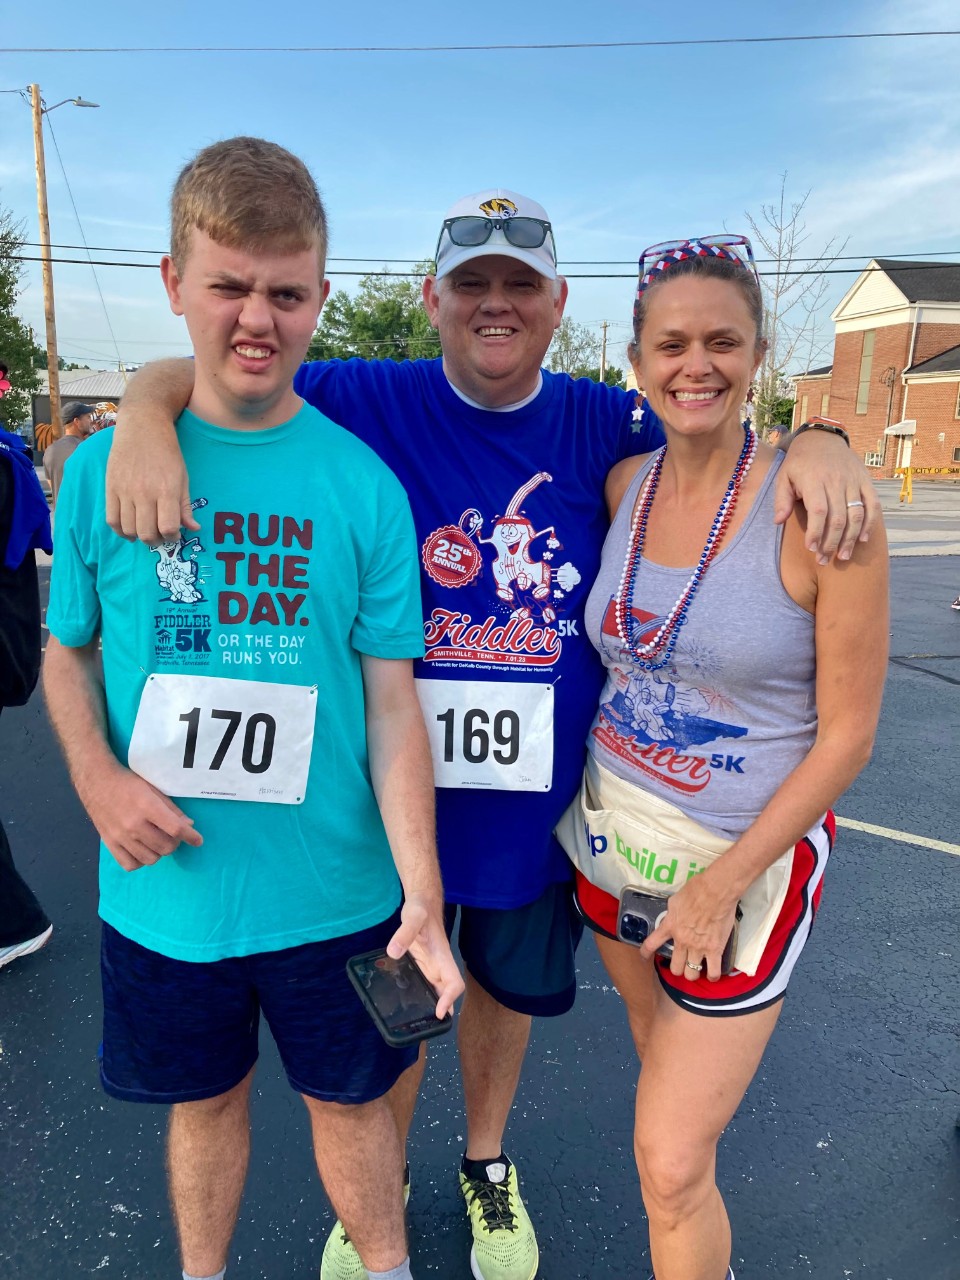 A white young man and two older adults pose together, smiling at the camera. They are wearing race bibs and Fourth of July garb. 